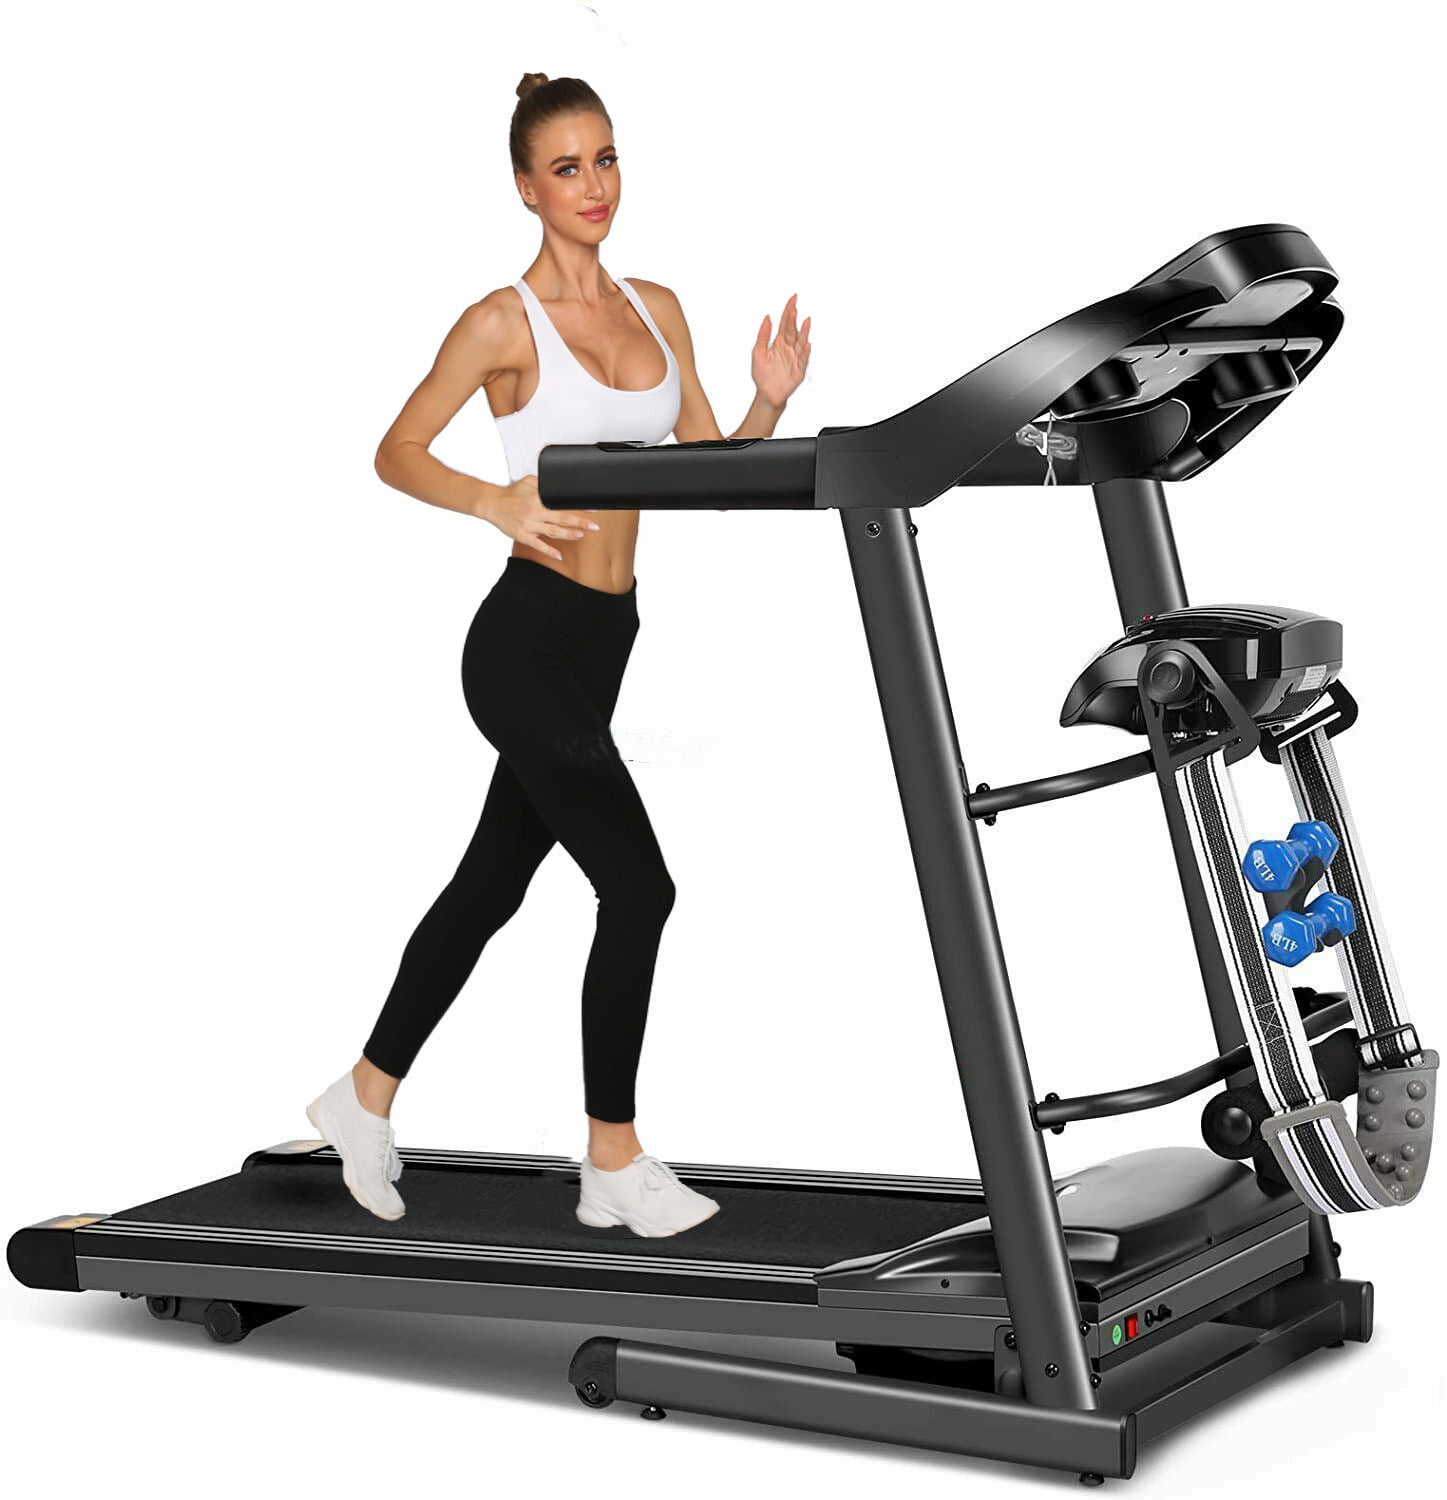 Treadmill with Multifunctional Massage Head Legs and Neck SYTIRY Home Treadmill,3.25 HP Folding Treadmill Exercise Machine Suitable for Home/Office/Gym Aerobic Fitness Trainer for Waist